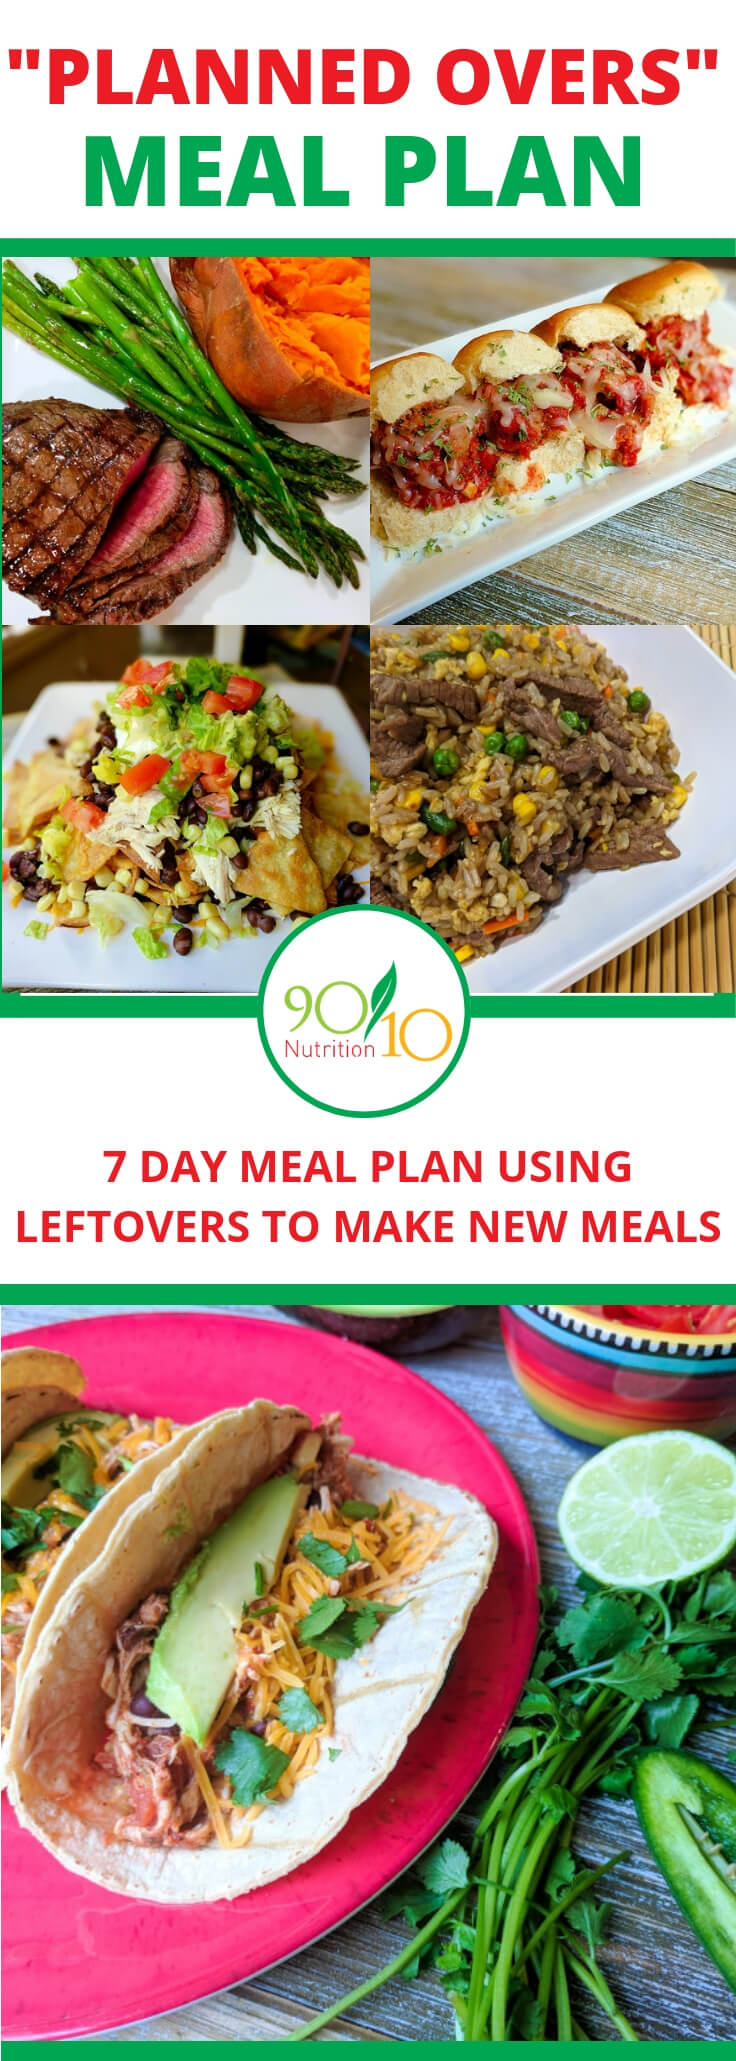 Use Leftovers to make new meals